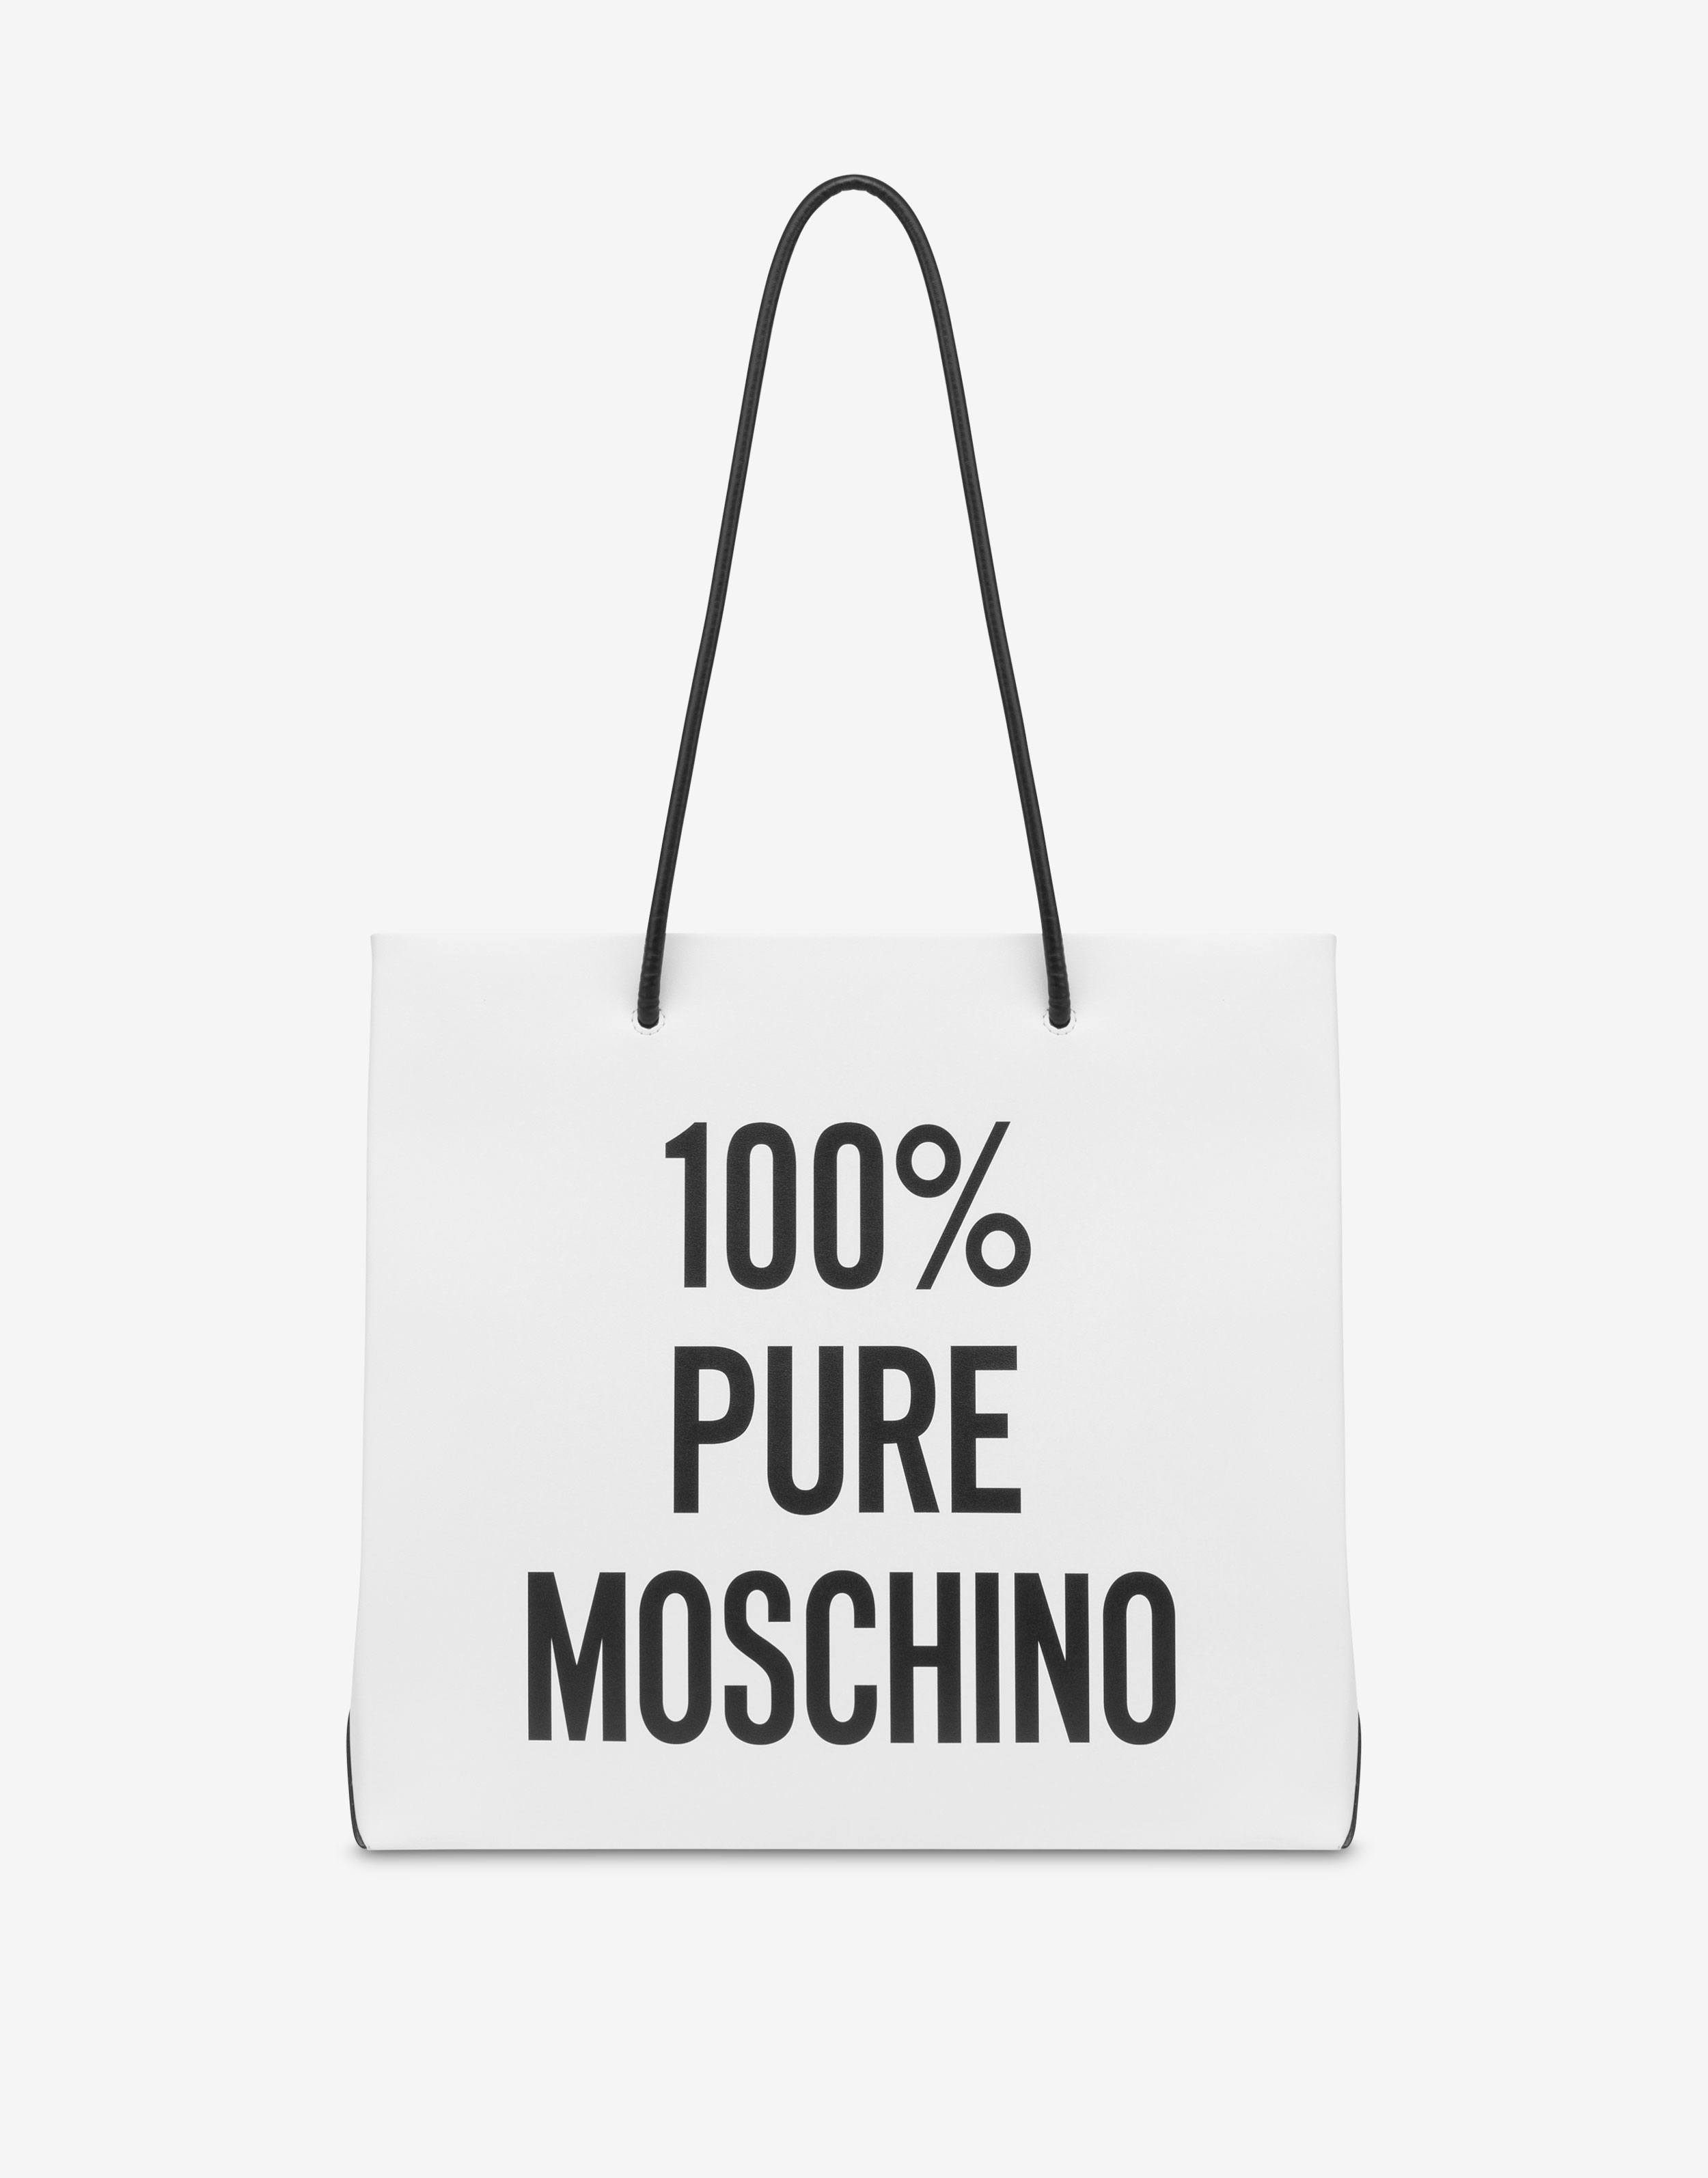 Moschino Bugs Bunny Printed Zipped Tote Bag - ShopStyle